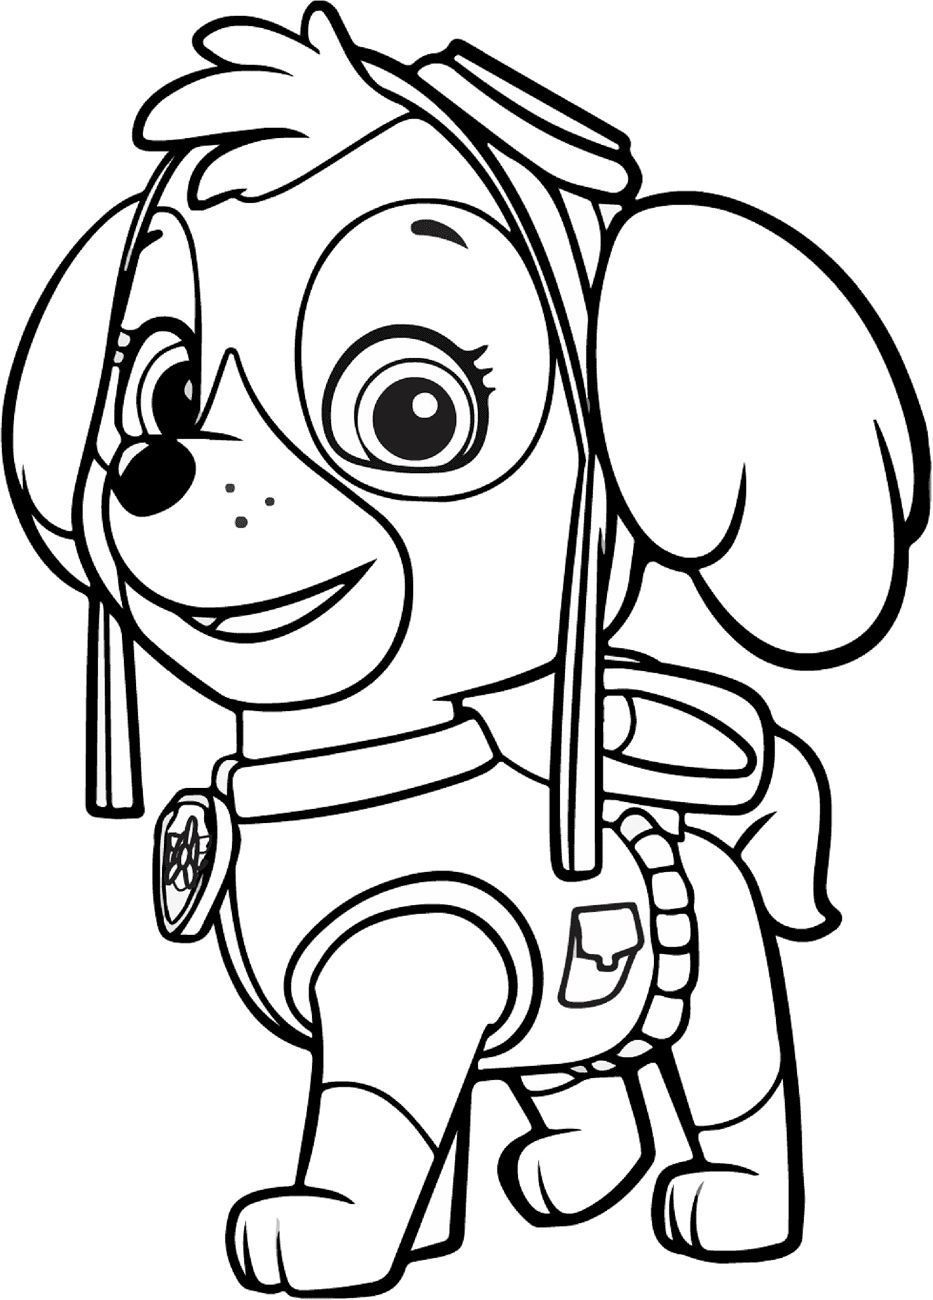 Skye Paw Patrol Coloring Pages - Free Printable Coloring Pages for Kids